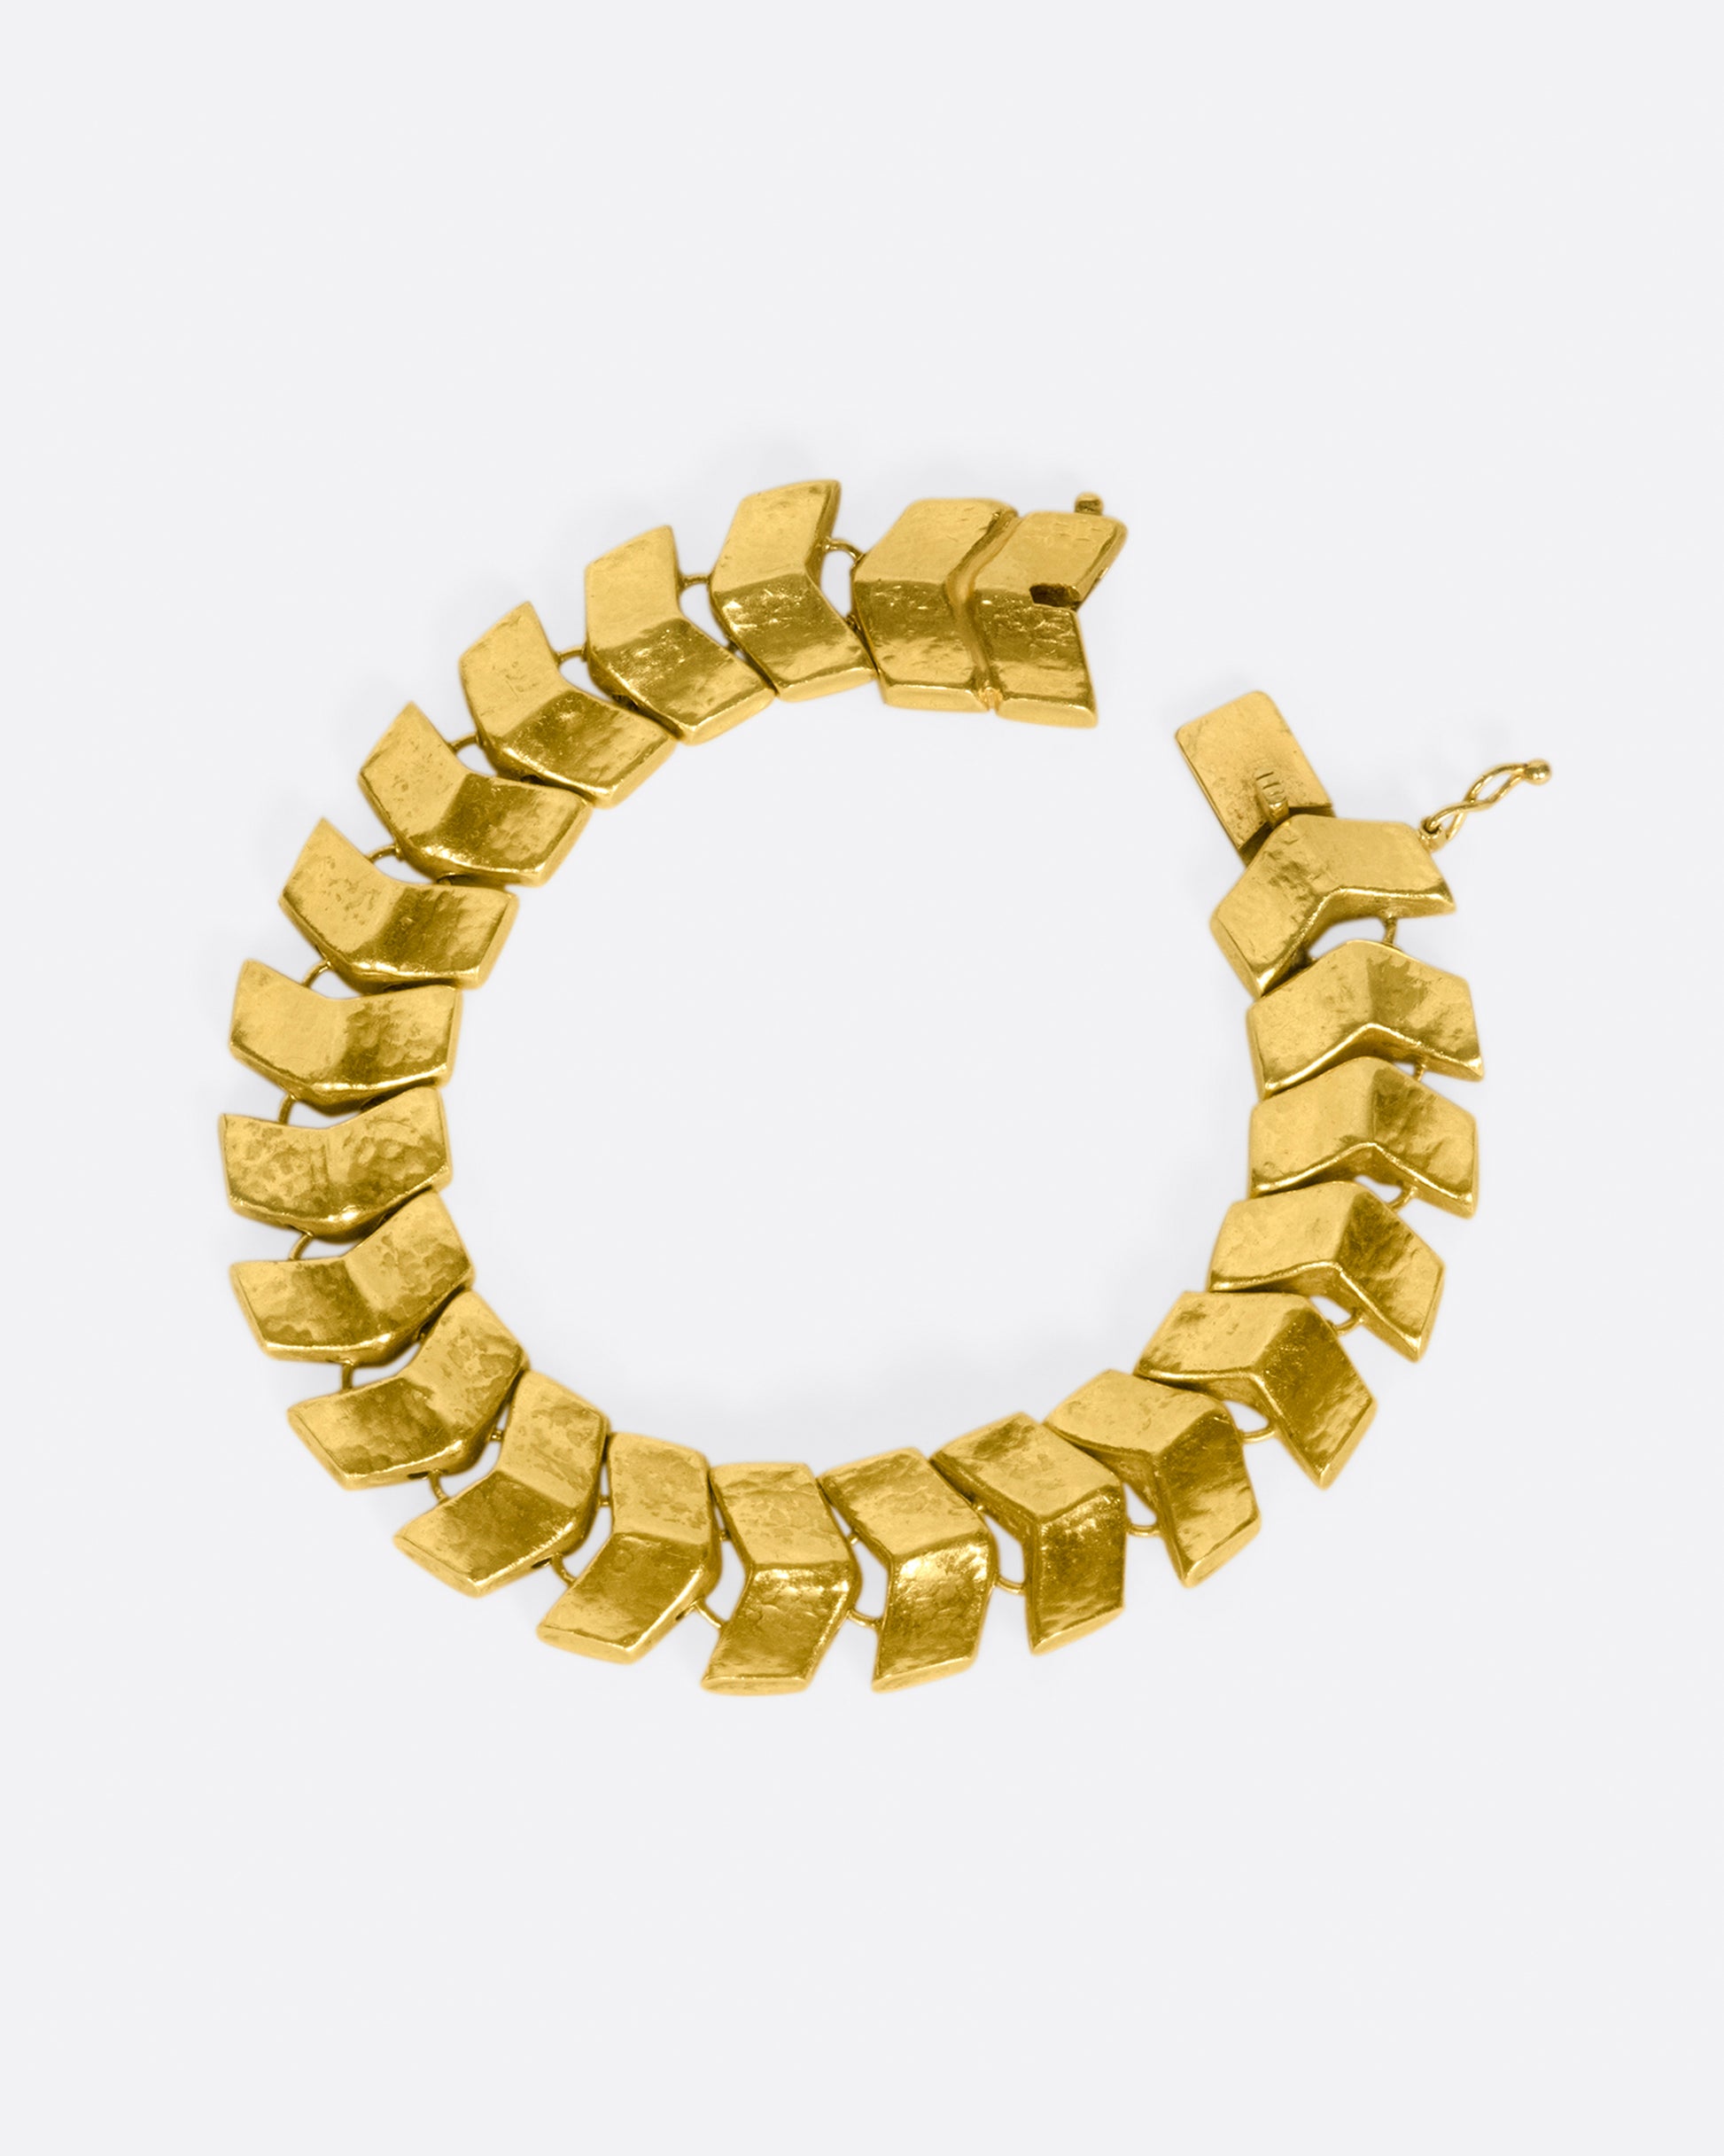 Made from buttery, high karat gold, the links on this bracelet are both substantial in size and in impact.